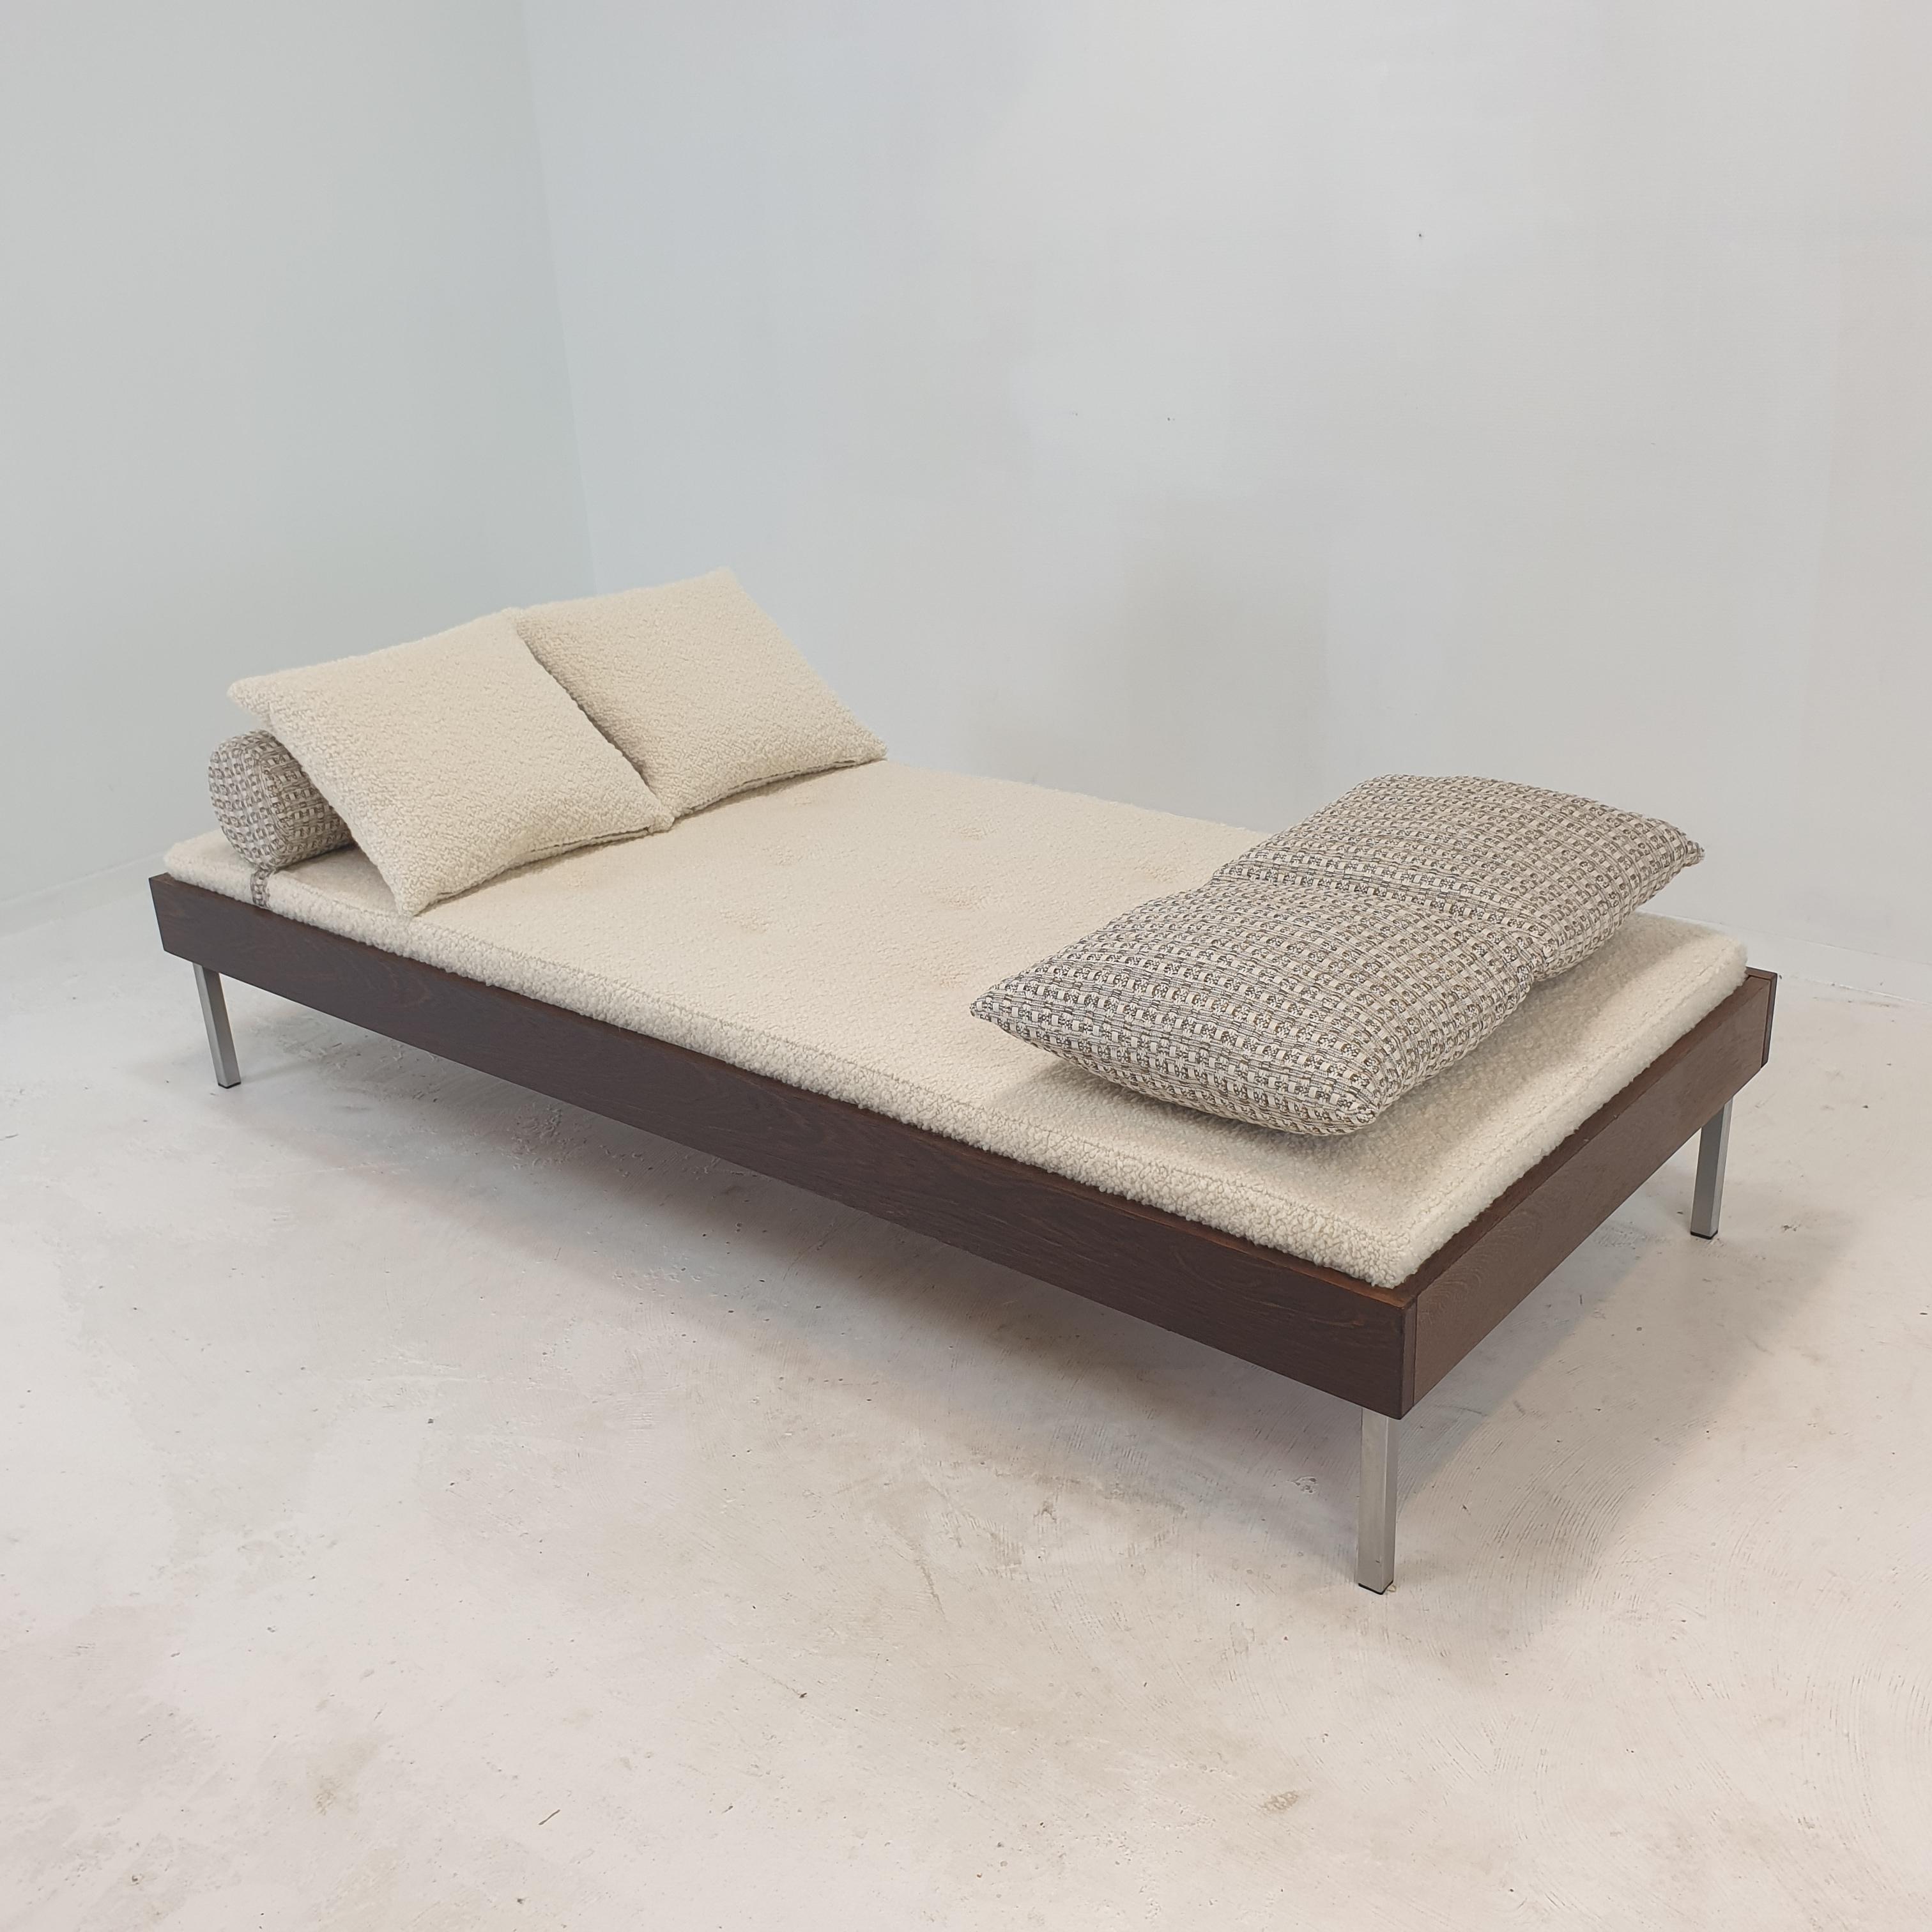 Woven Wengé Daybed with Dedar Cushions and Bolster, 1970s For Sale